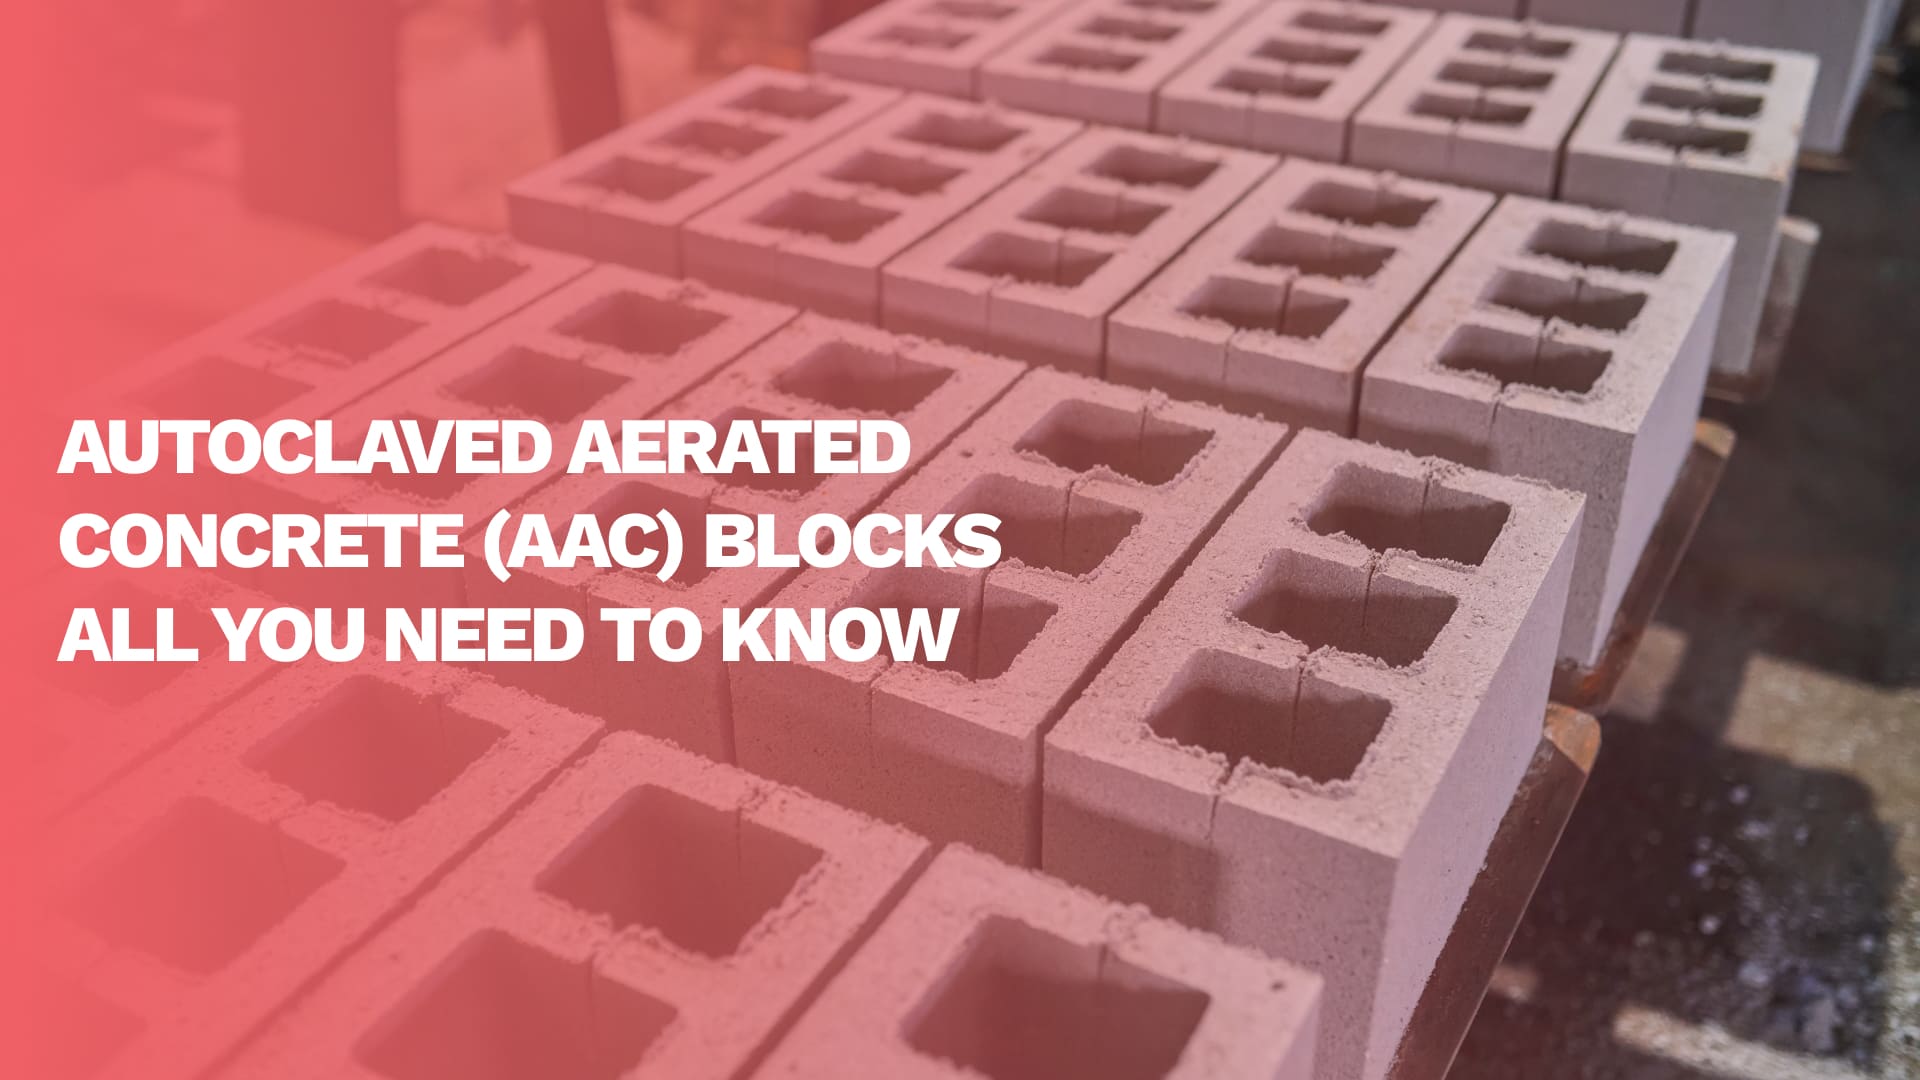 You are currently viewing All You Need To Know About Autoclaved Aerated Concrete (AAC) Blocks